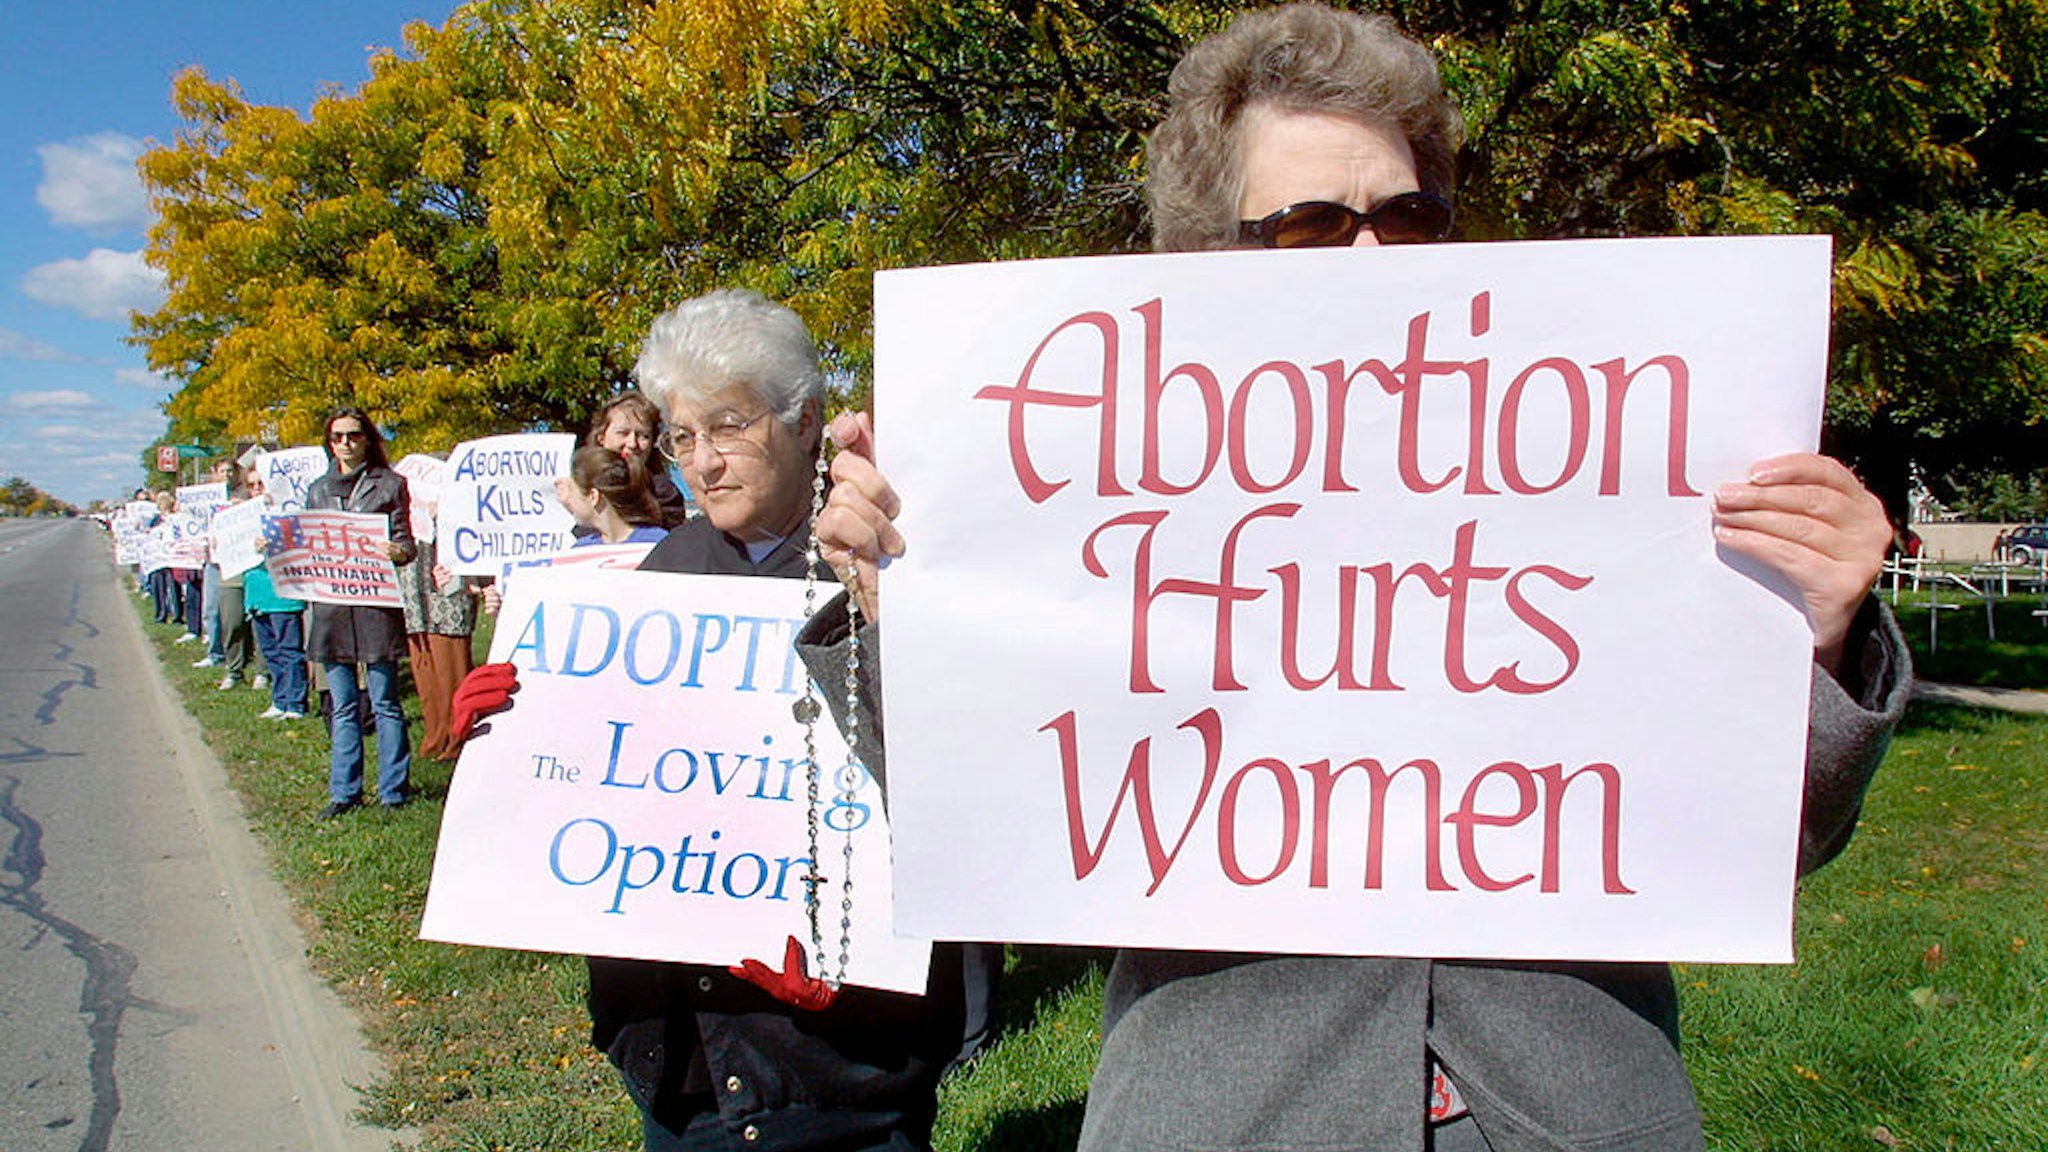 395471 03: Pro-life supporters gather along a two-mile stretch of Woodward Avenue October 7, 2001 in Royal Oak, Michigan. Approximately 2,000 abortions are performed in the United States each day. (Photo by Bill Pugliano/Getty Images)